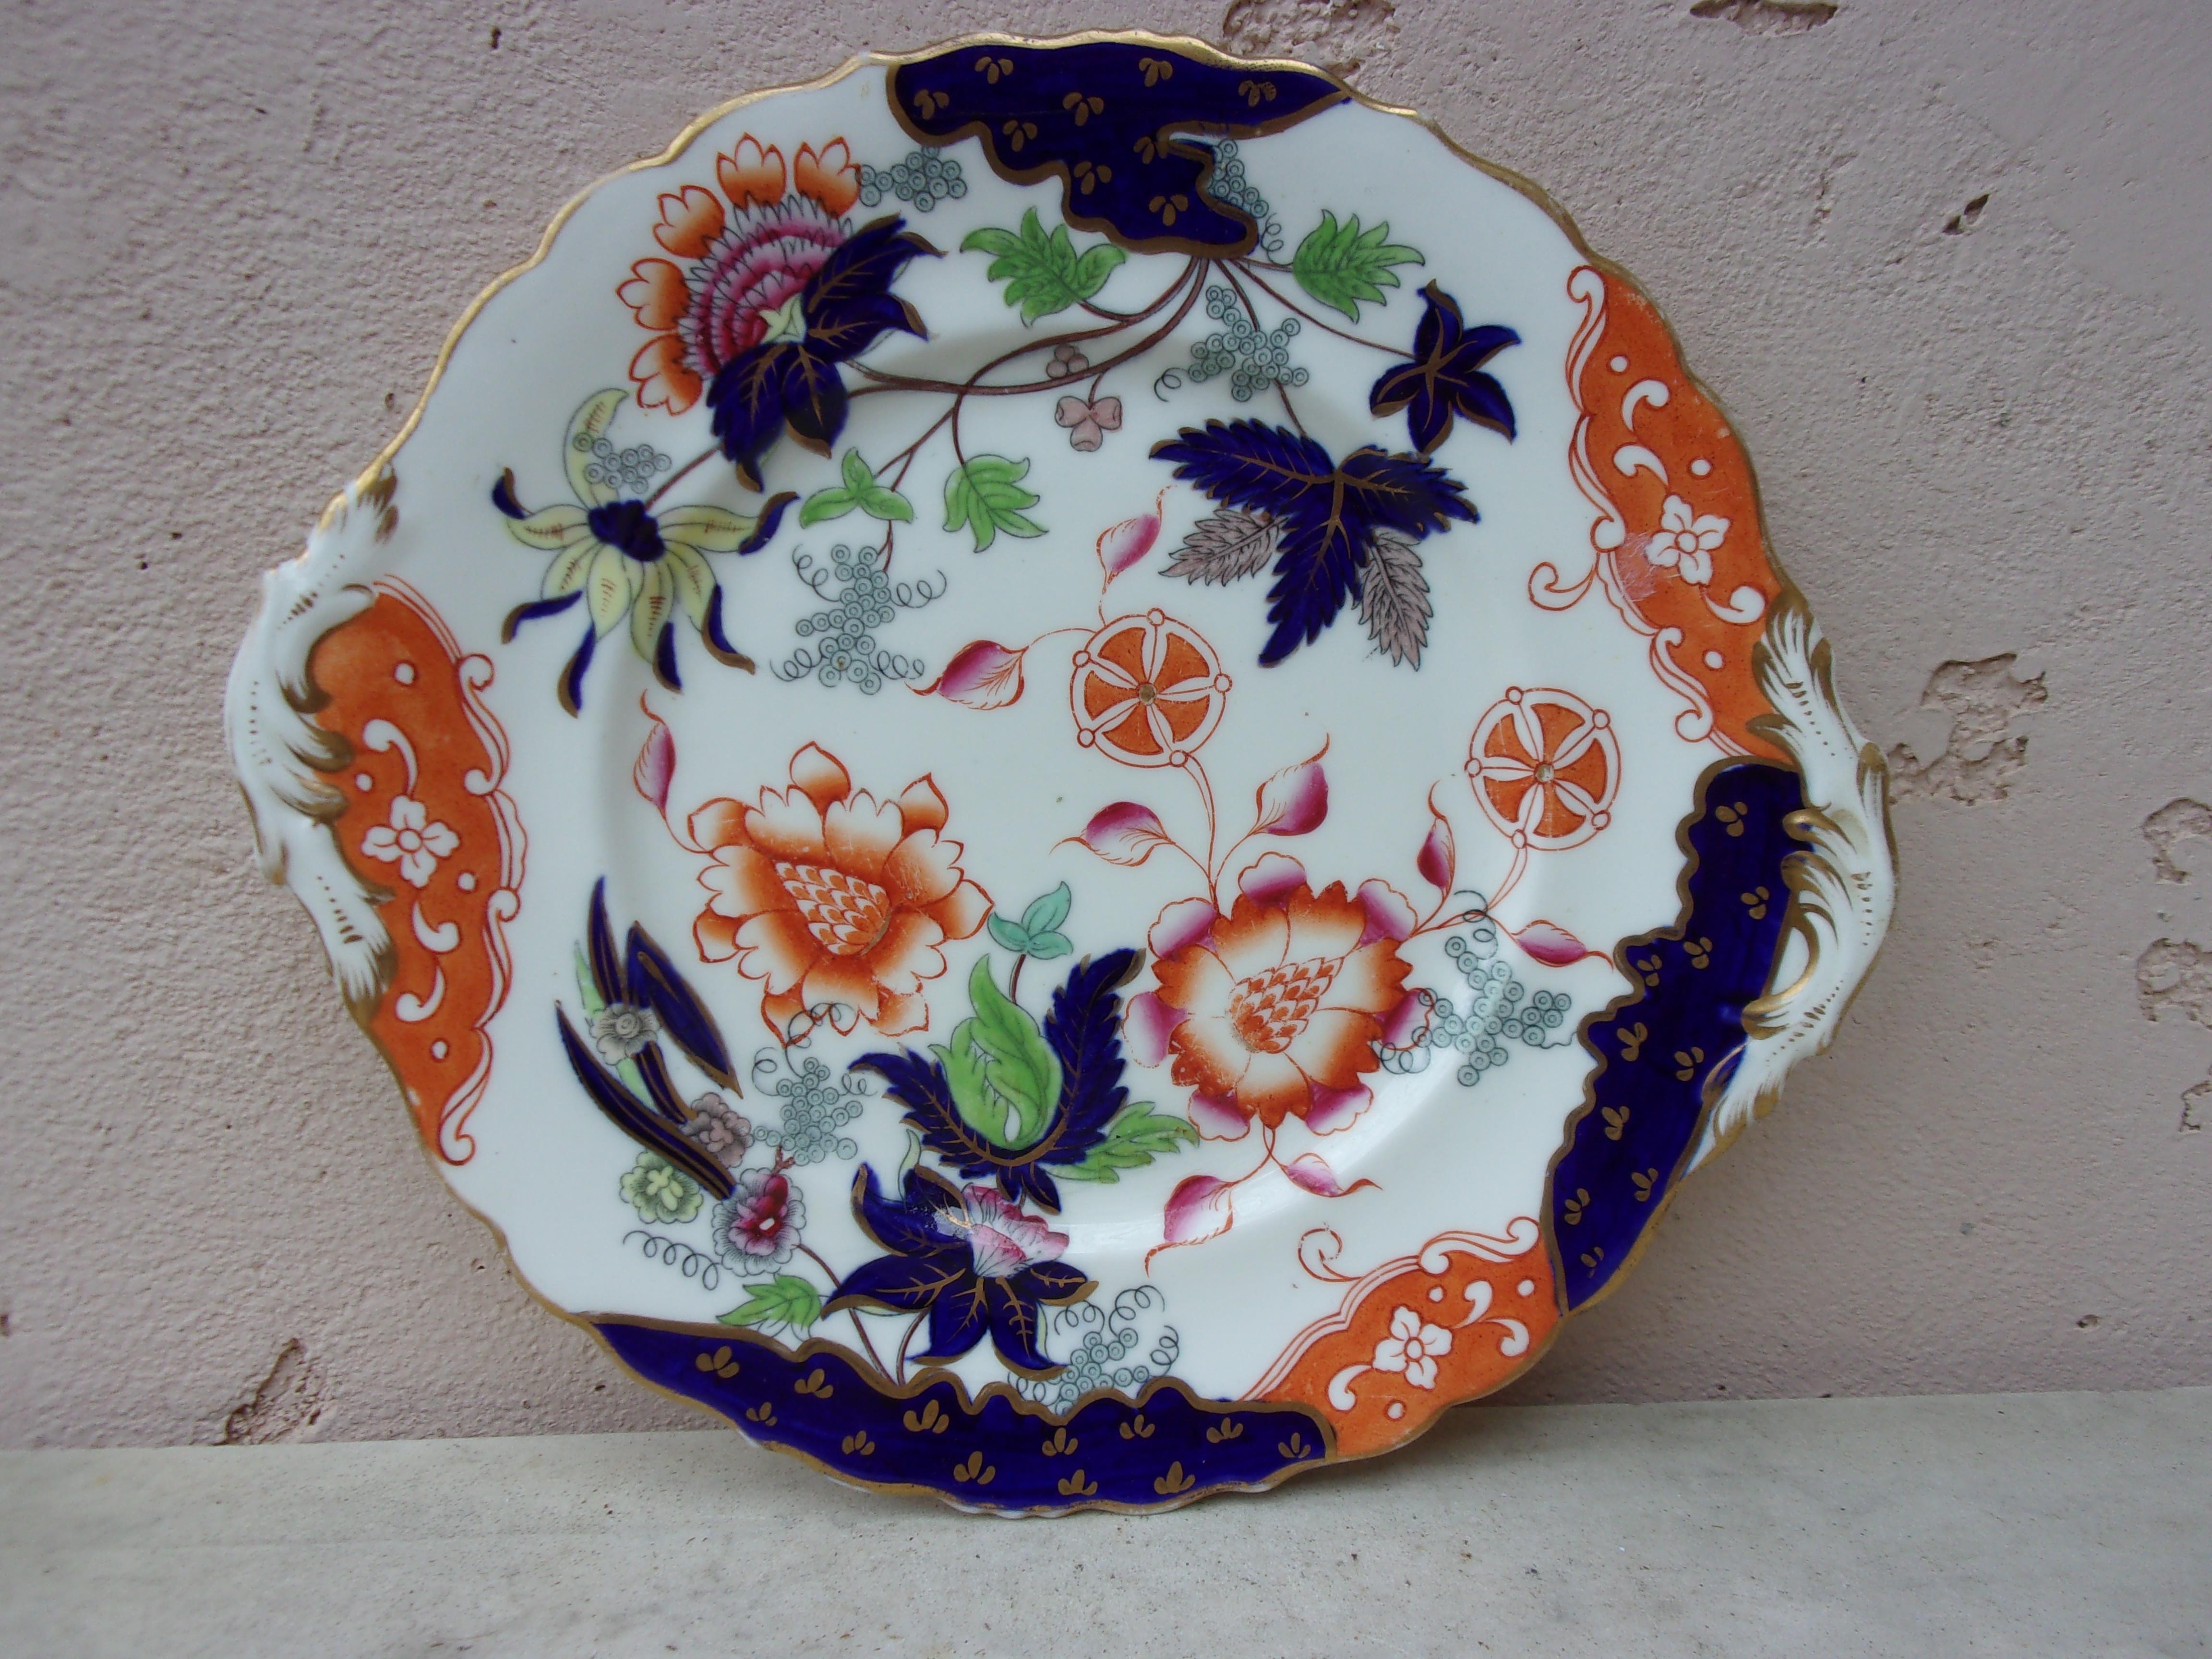 English ironstone platter circa 1890.
Chinoiserie or Imari style, decorated with flowers.